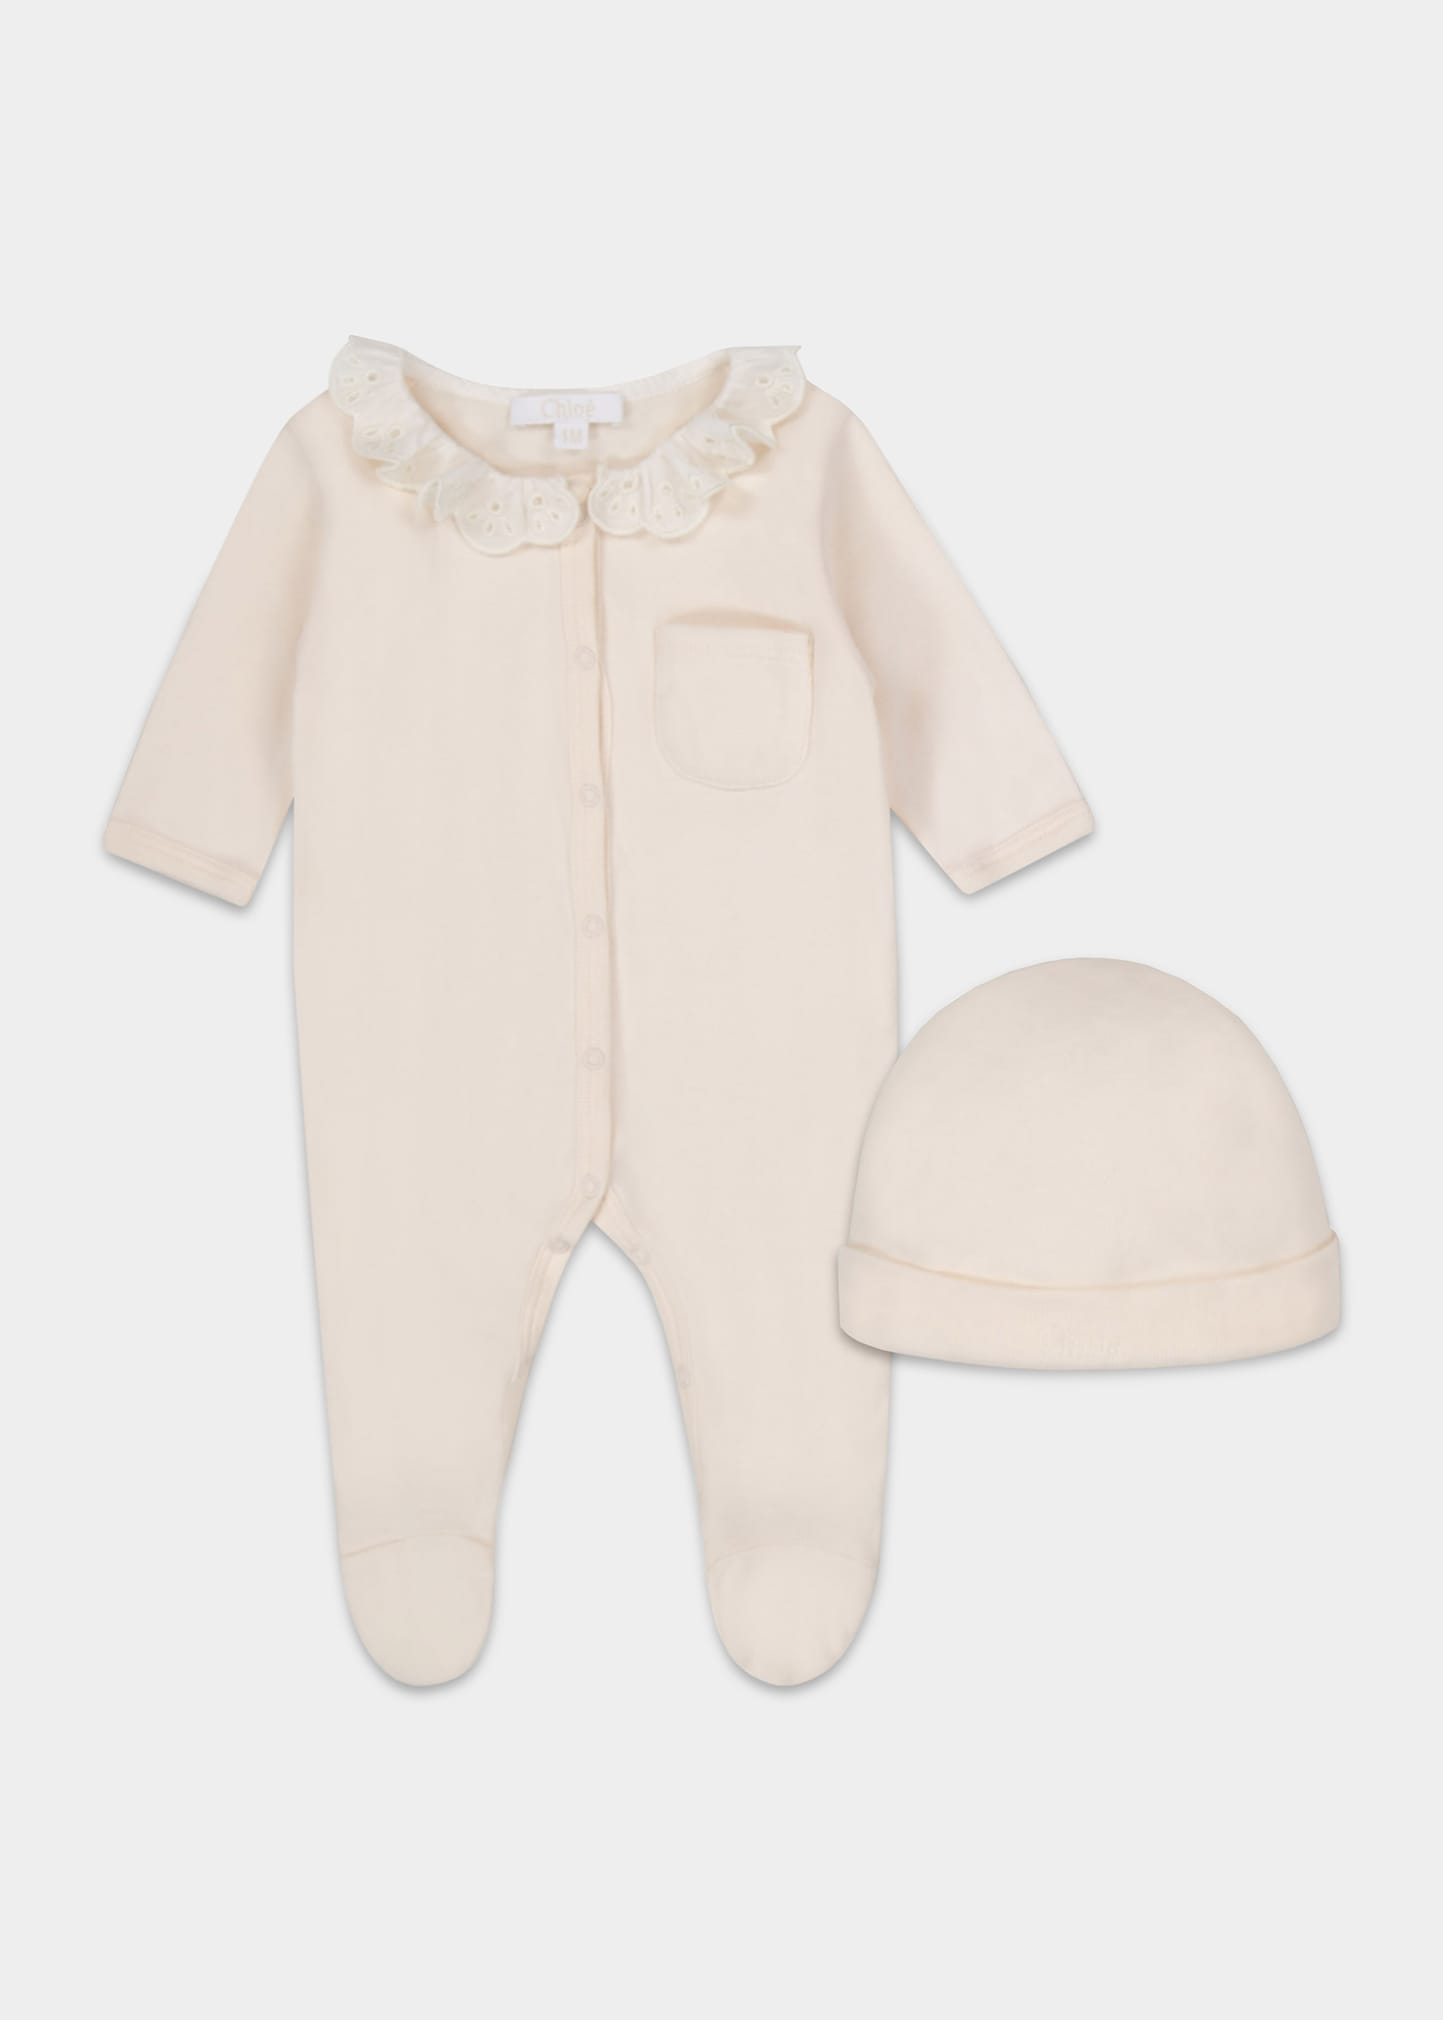 Girl's Eyelet Collar Footed Coverall, Size Newborn-6M